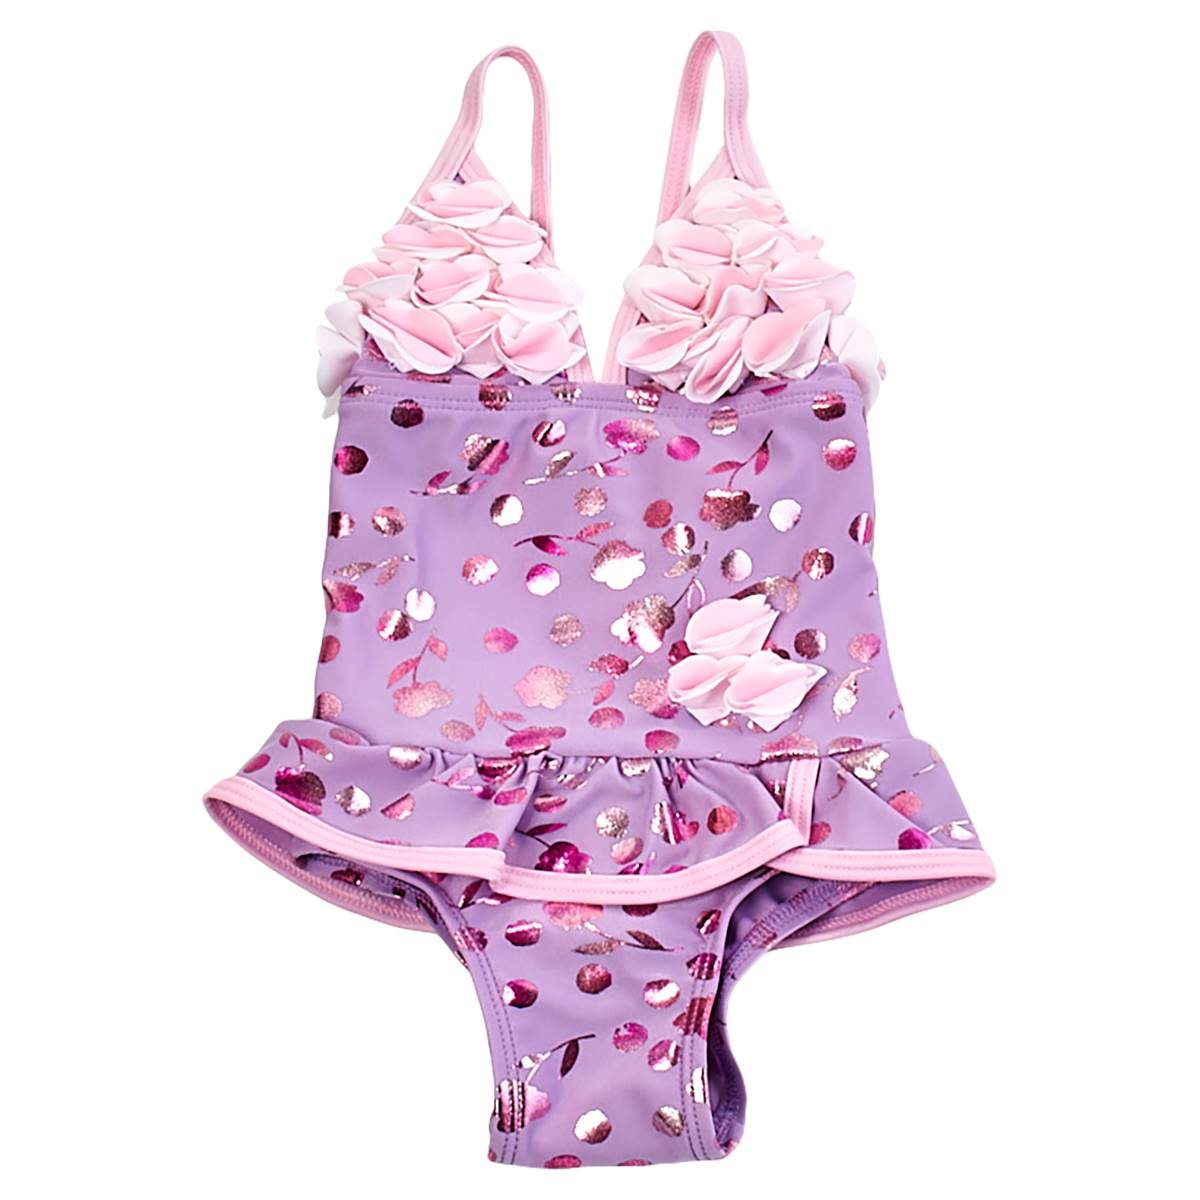 Baby Girl (12-24M) Floatimini(R) Ombre Foil One Piece Swimsuit